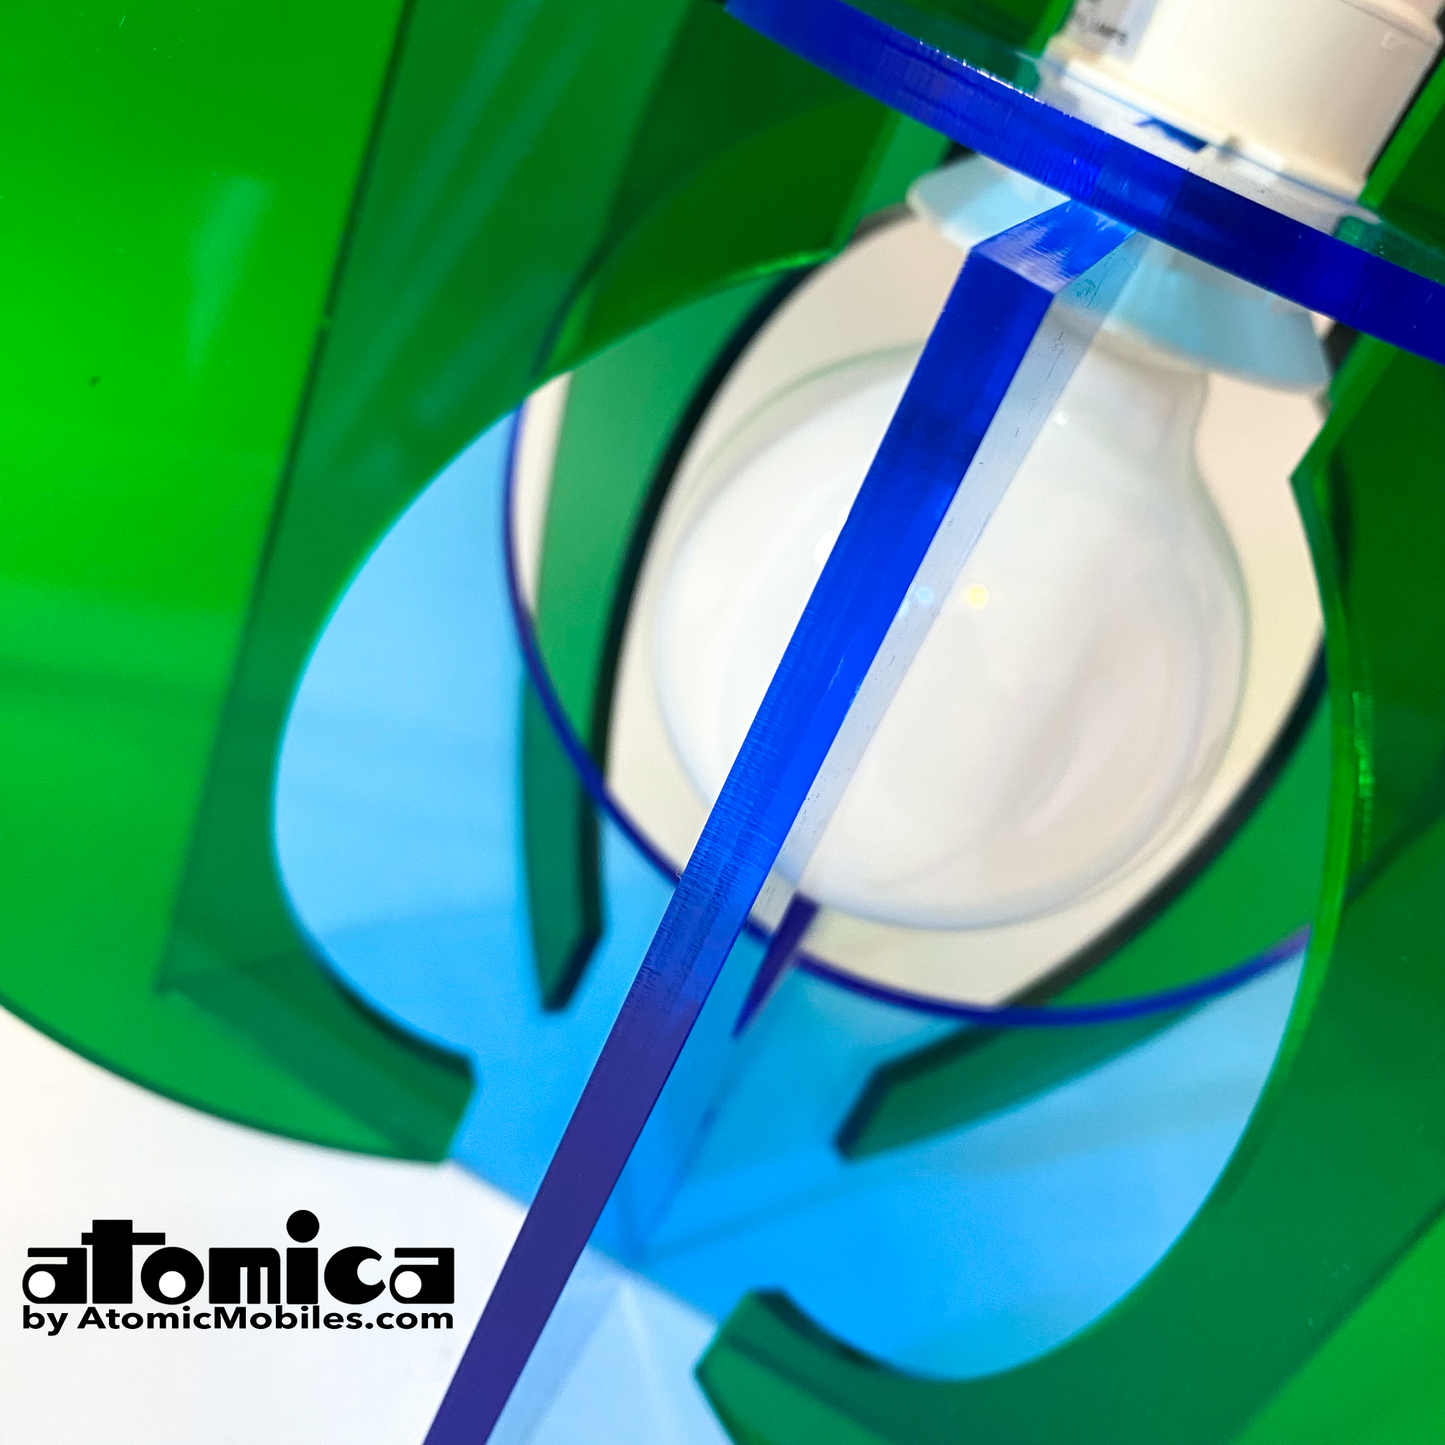 Closeup of Atomica Space Age Lamp in clear blue and green plexiglass acrylic by AtomicMobiles.com